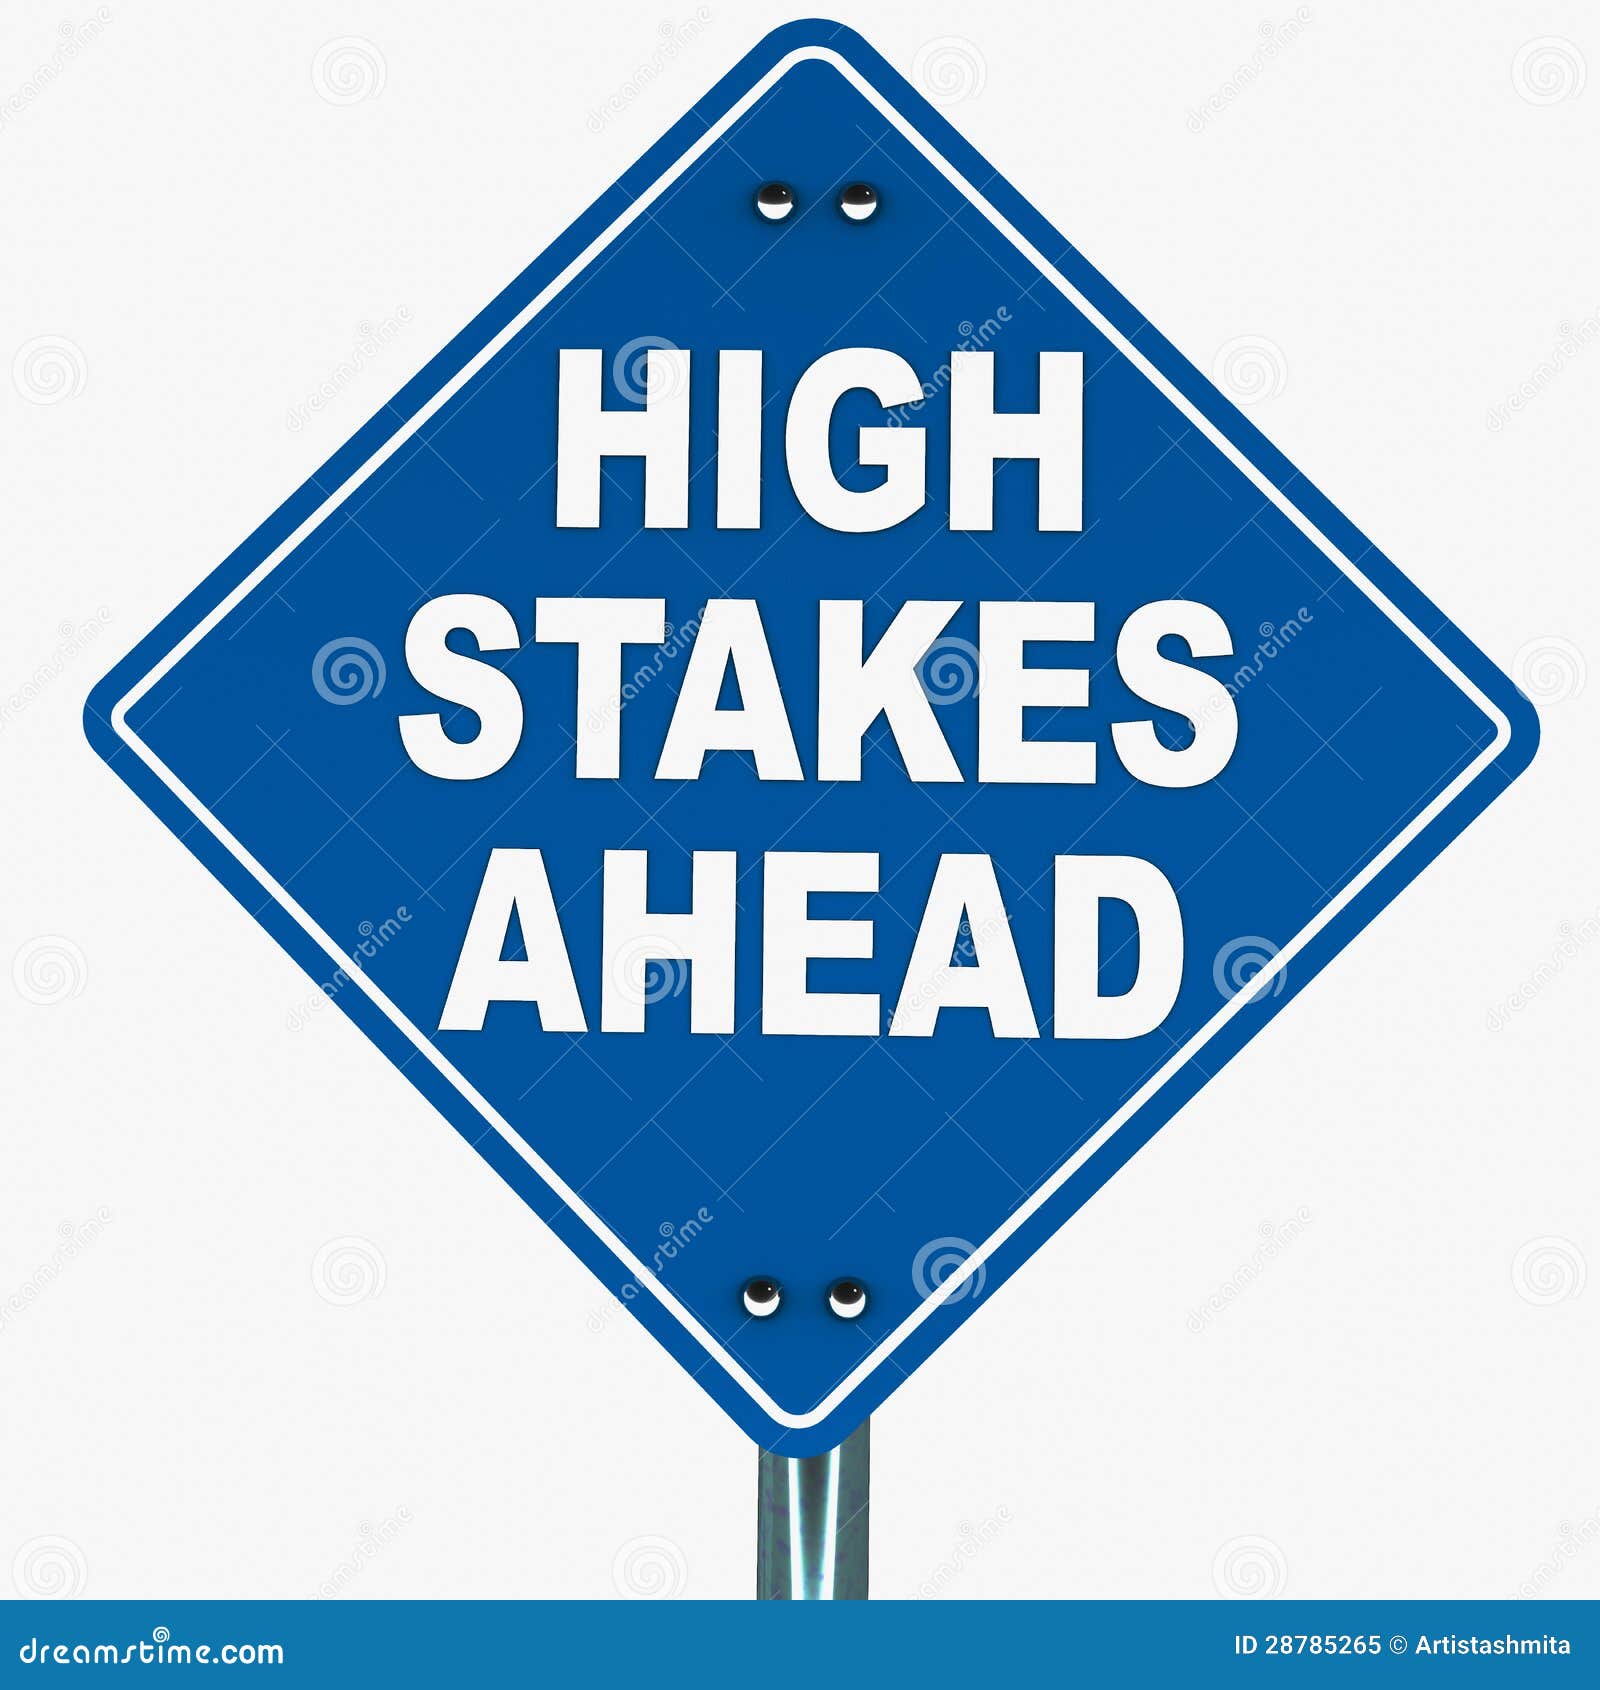 Take Advantage Of Highstake Sweeps - Read These 6 Tips